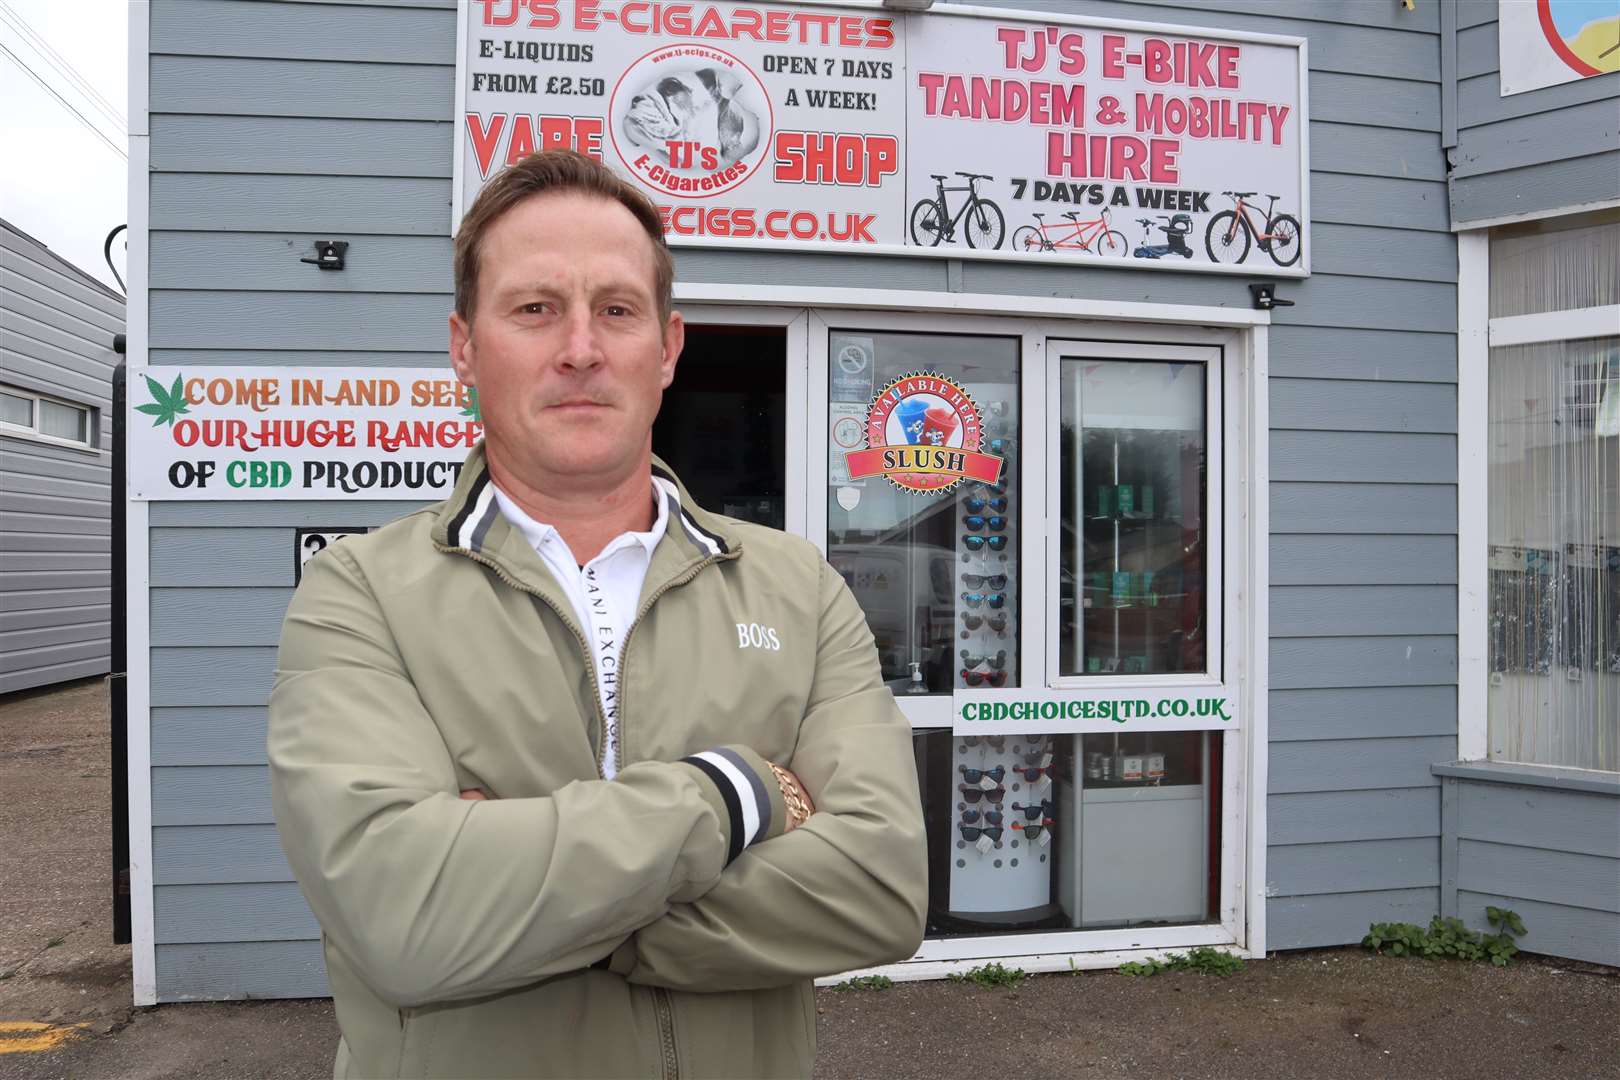 Owner Terry Utting after the raid at TJ's E-cigarettes store in Leysdown